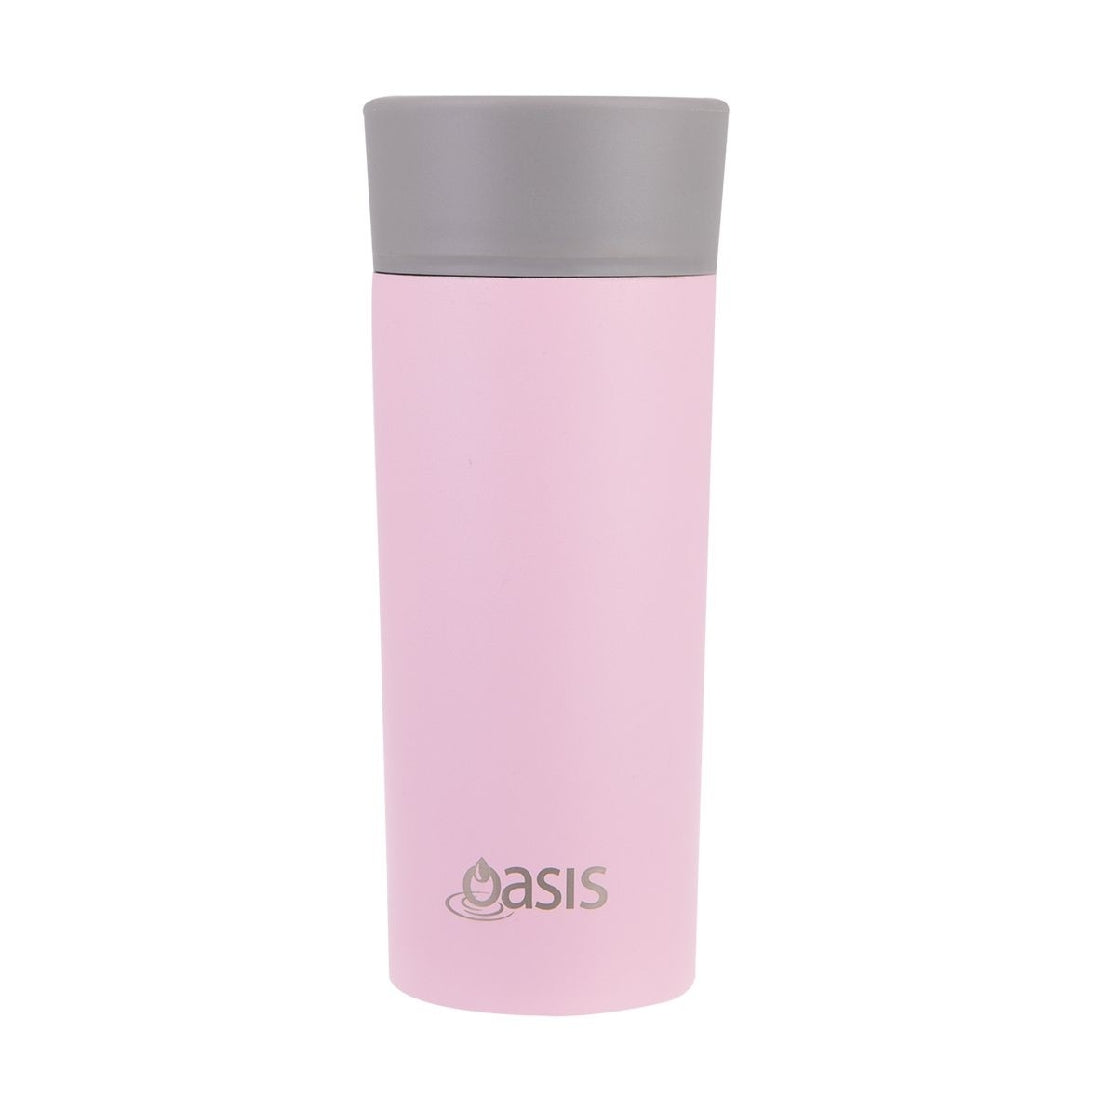 Oasis Stainless Steel Double Wall Insulated Travel Mug 360ml - Carnation